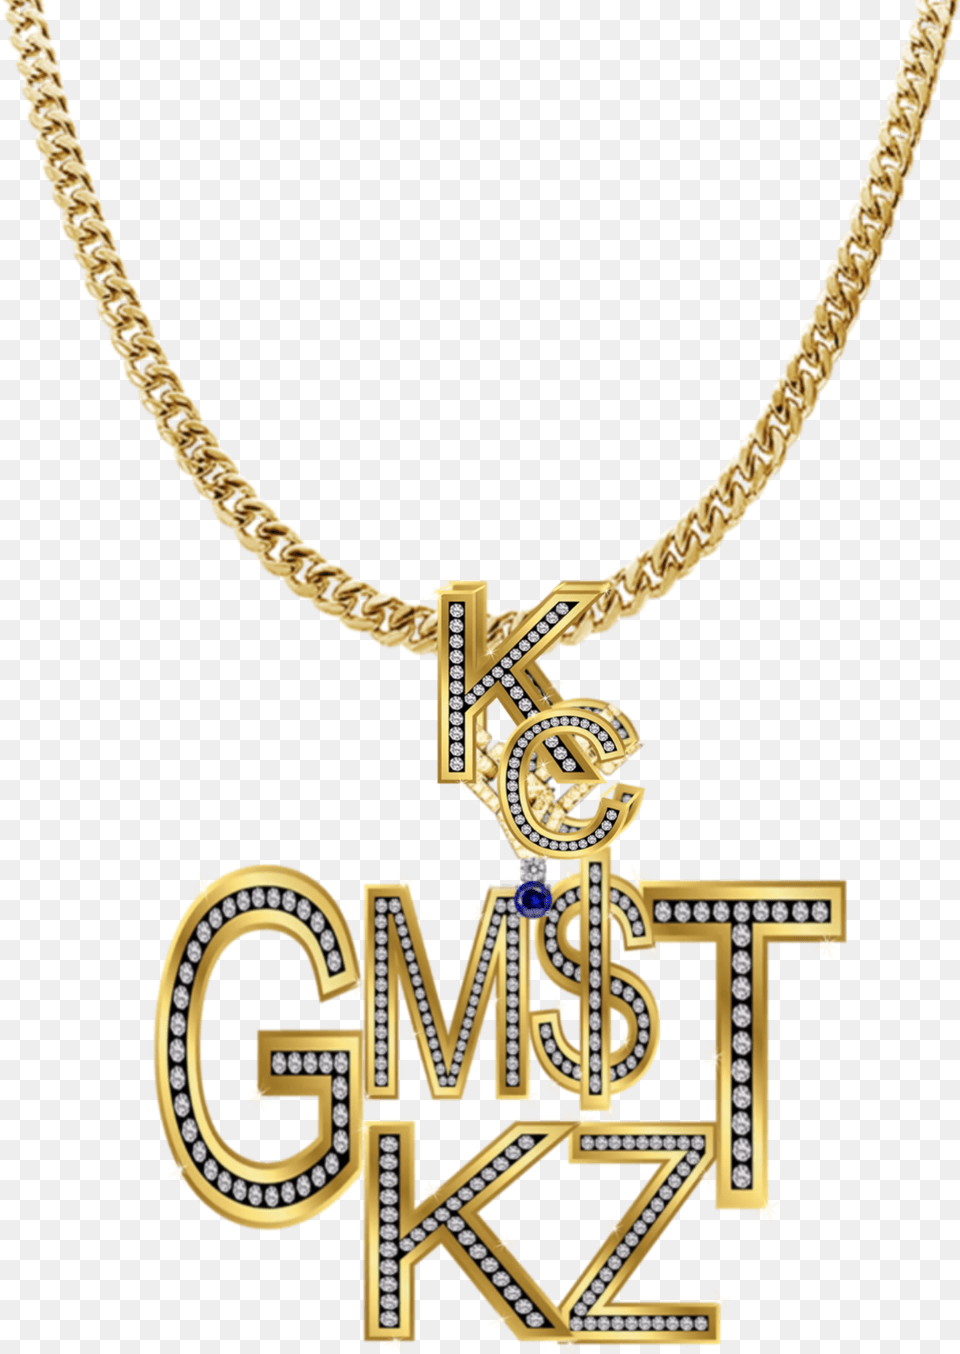 Jewelry Rapper Trapper Trap Gold Diamond Necklace Anjali Cutting Mangalya Chain, Accessories, Pendant, Gemstone Free Transparent Png